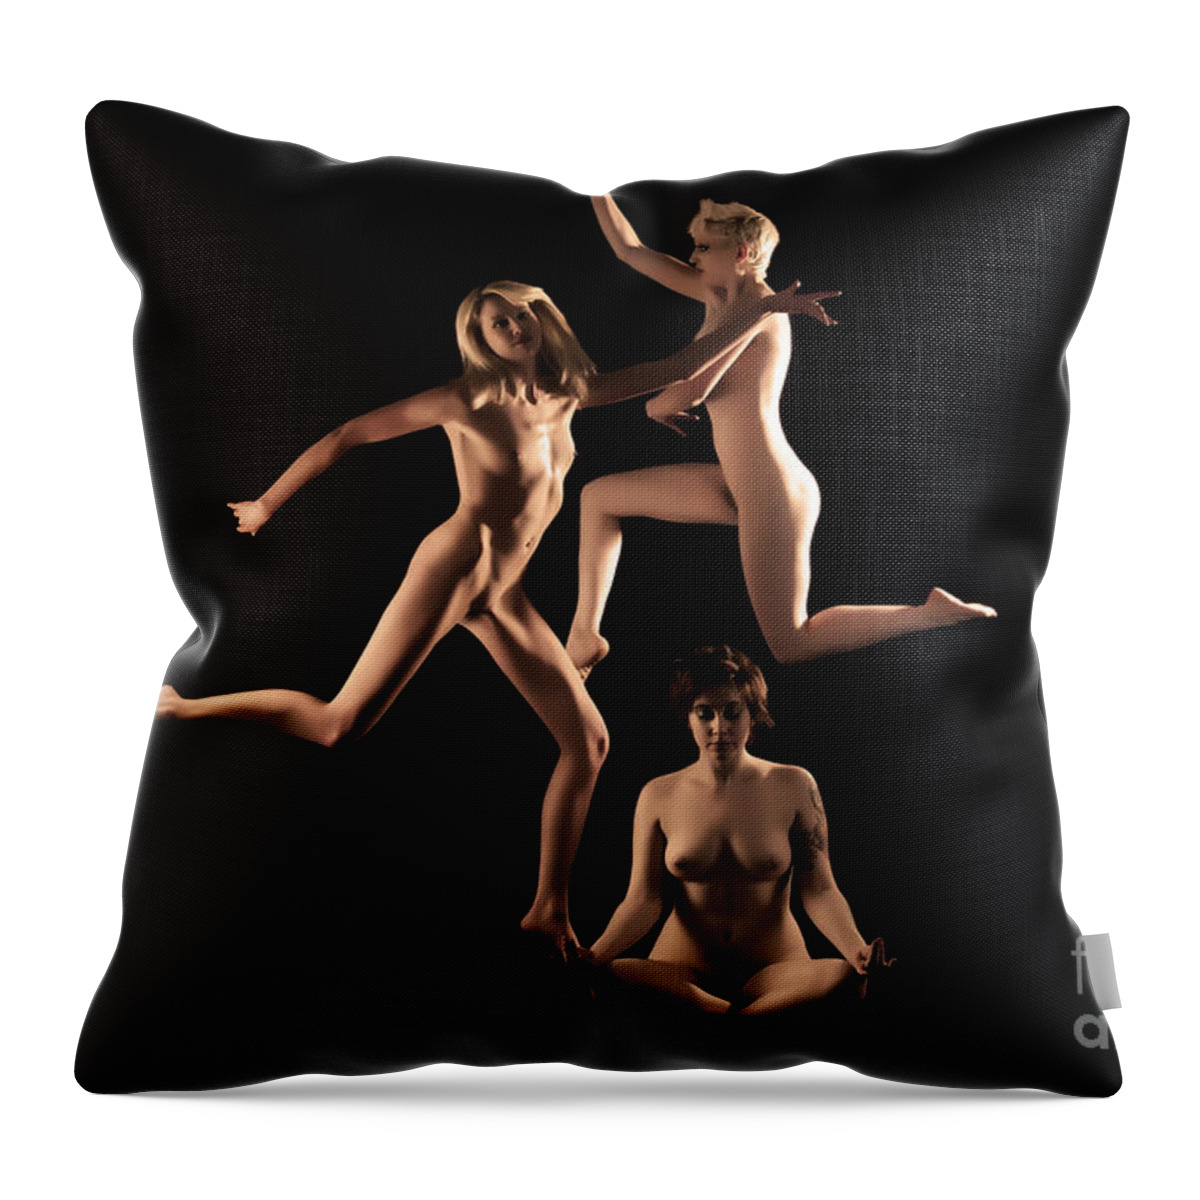 Artistic Photographs Throw Pillow featuring the photograph Heightened consciousness by Robert WK Clark